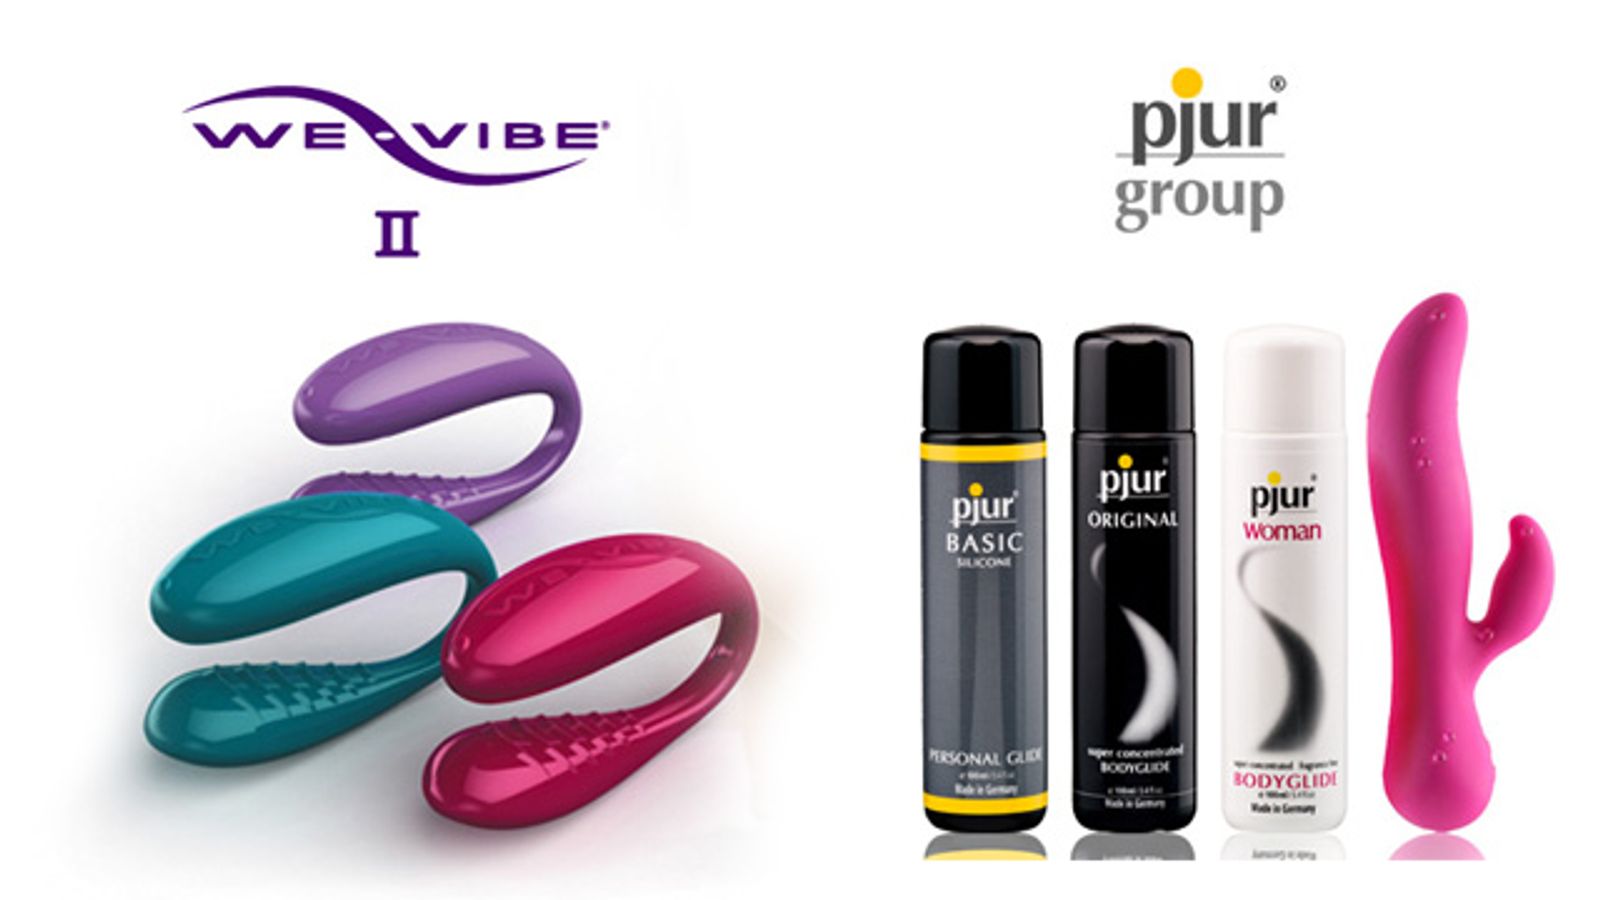 pjur Silicone-Based Lube Safe with We-Vibe Massagers